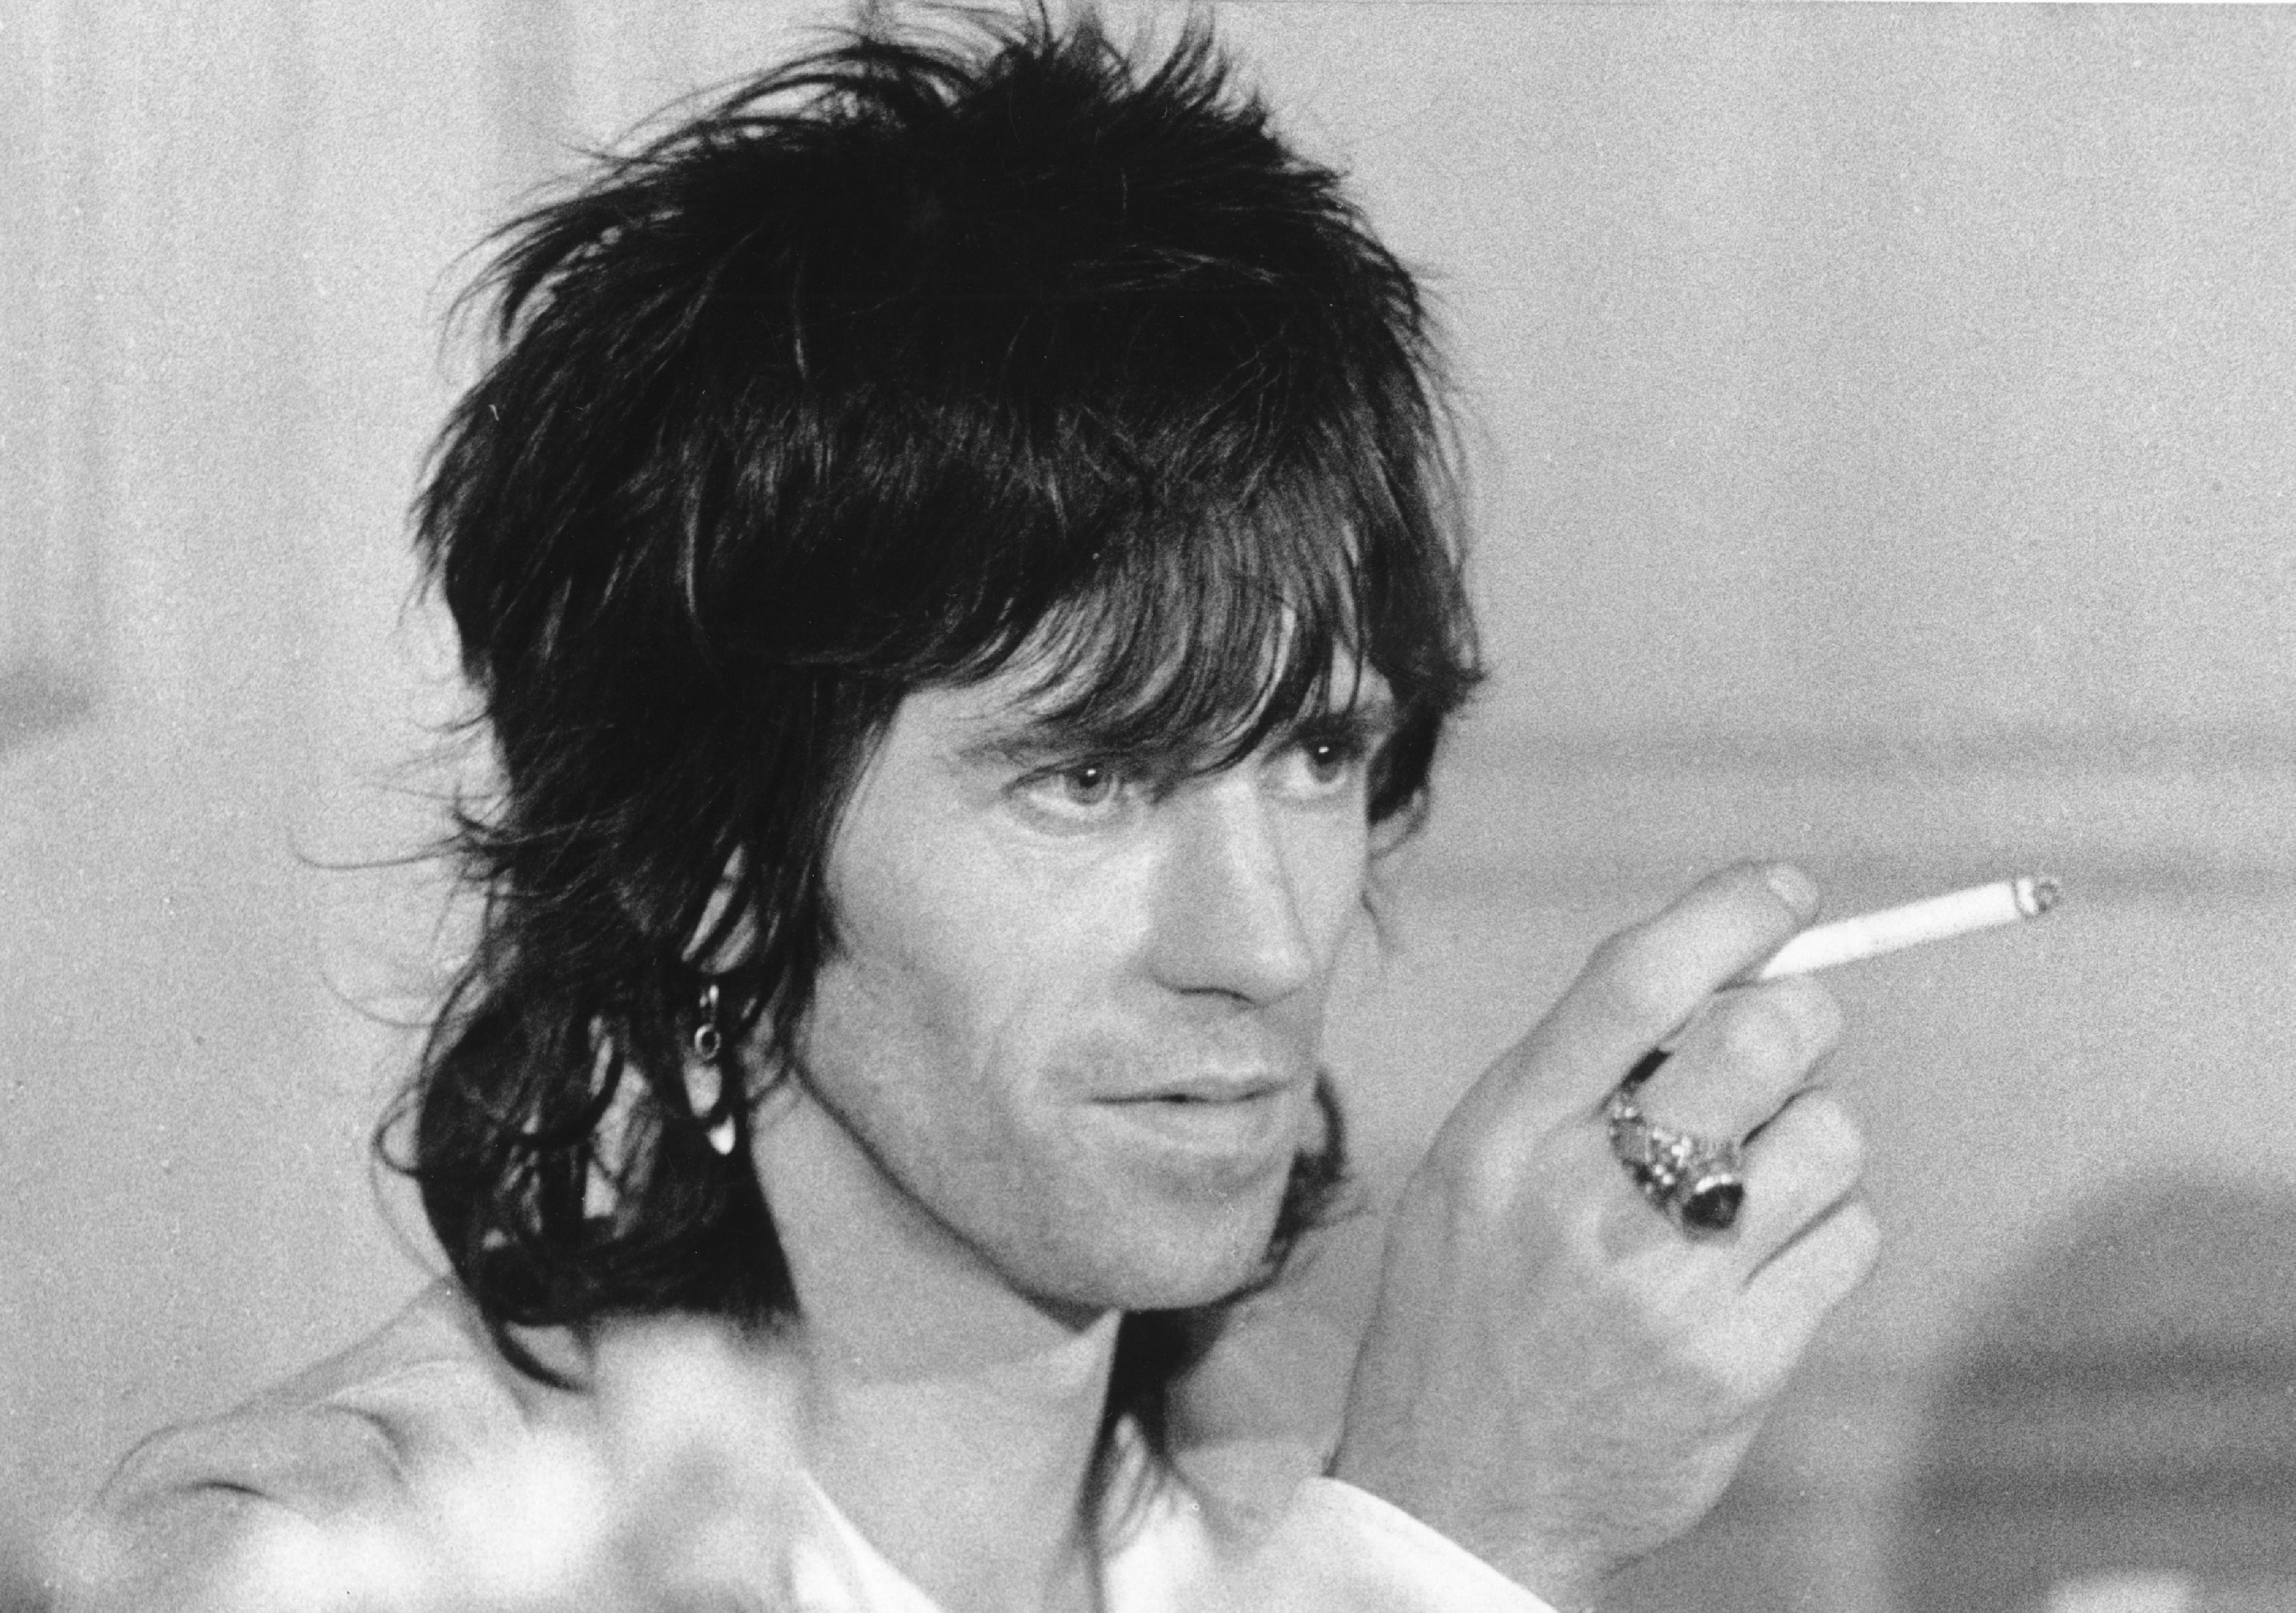 Keith Richards holding a cigarette